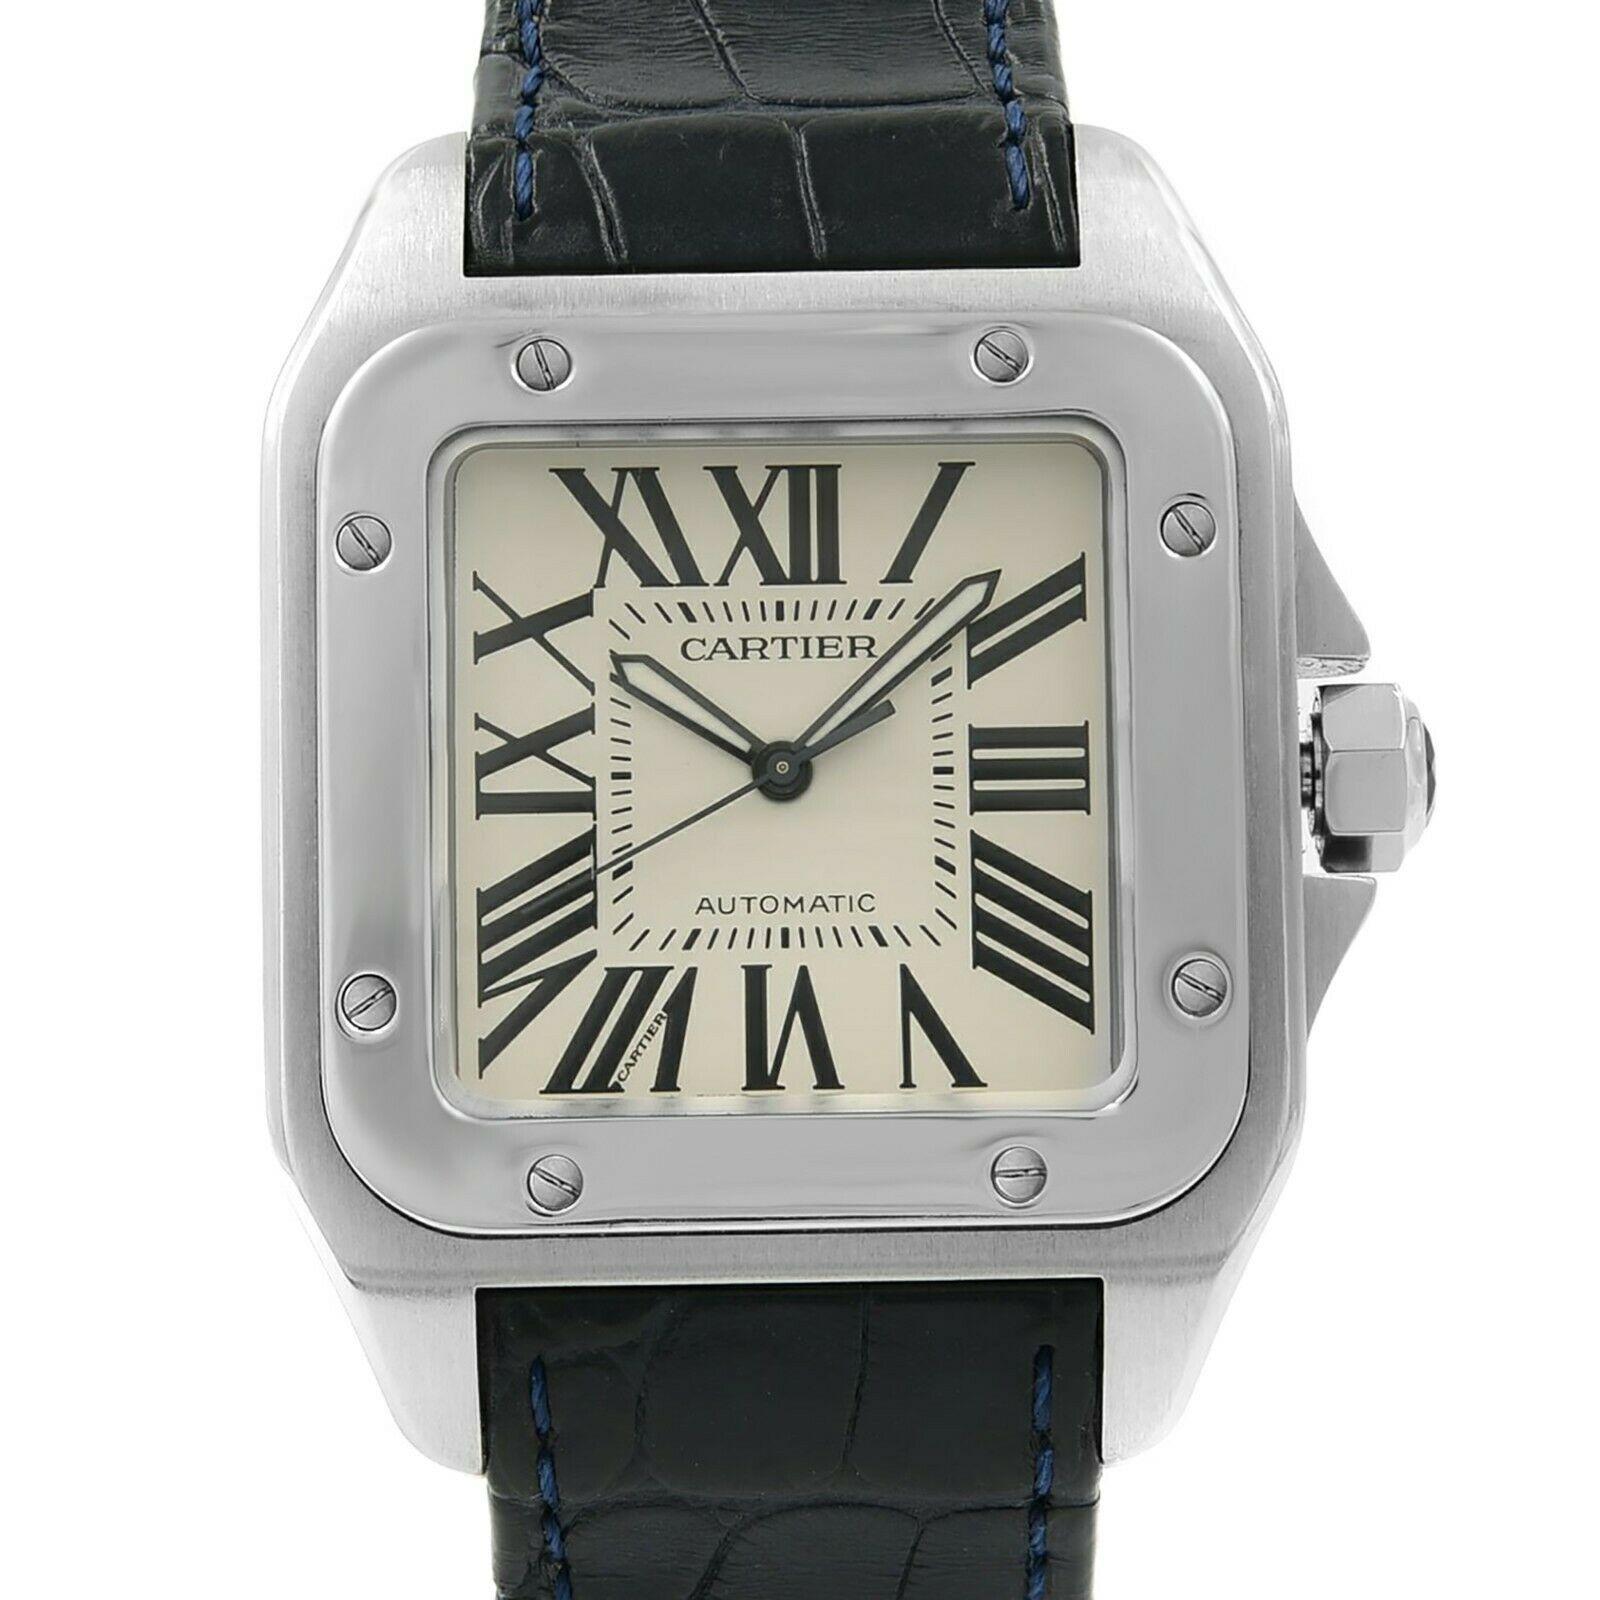 his pre-owned Cartier Santos W20073X8 is a beautiful men's timepiece that is powered by an automatic movement which is cased in a stainless steel case. It has a square shape face, no features dial and has hand roman numerals style markers. It is